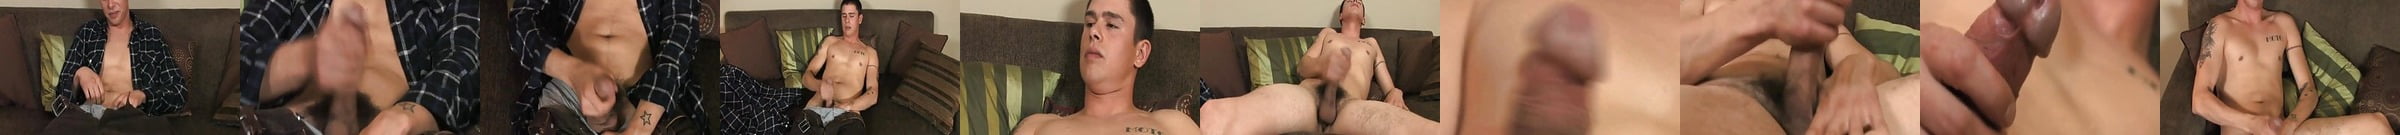 Goatee Thug Axel Working Out A Load Gay Porn 1c Xhamster